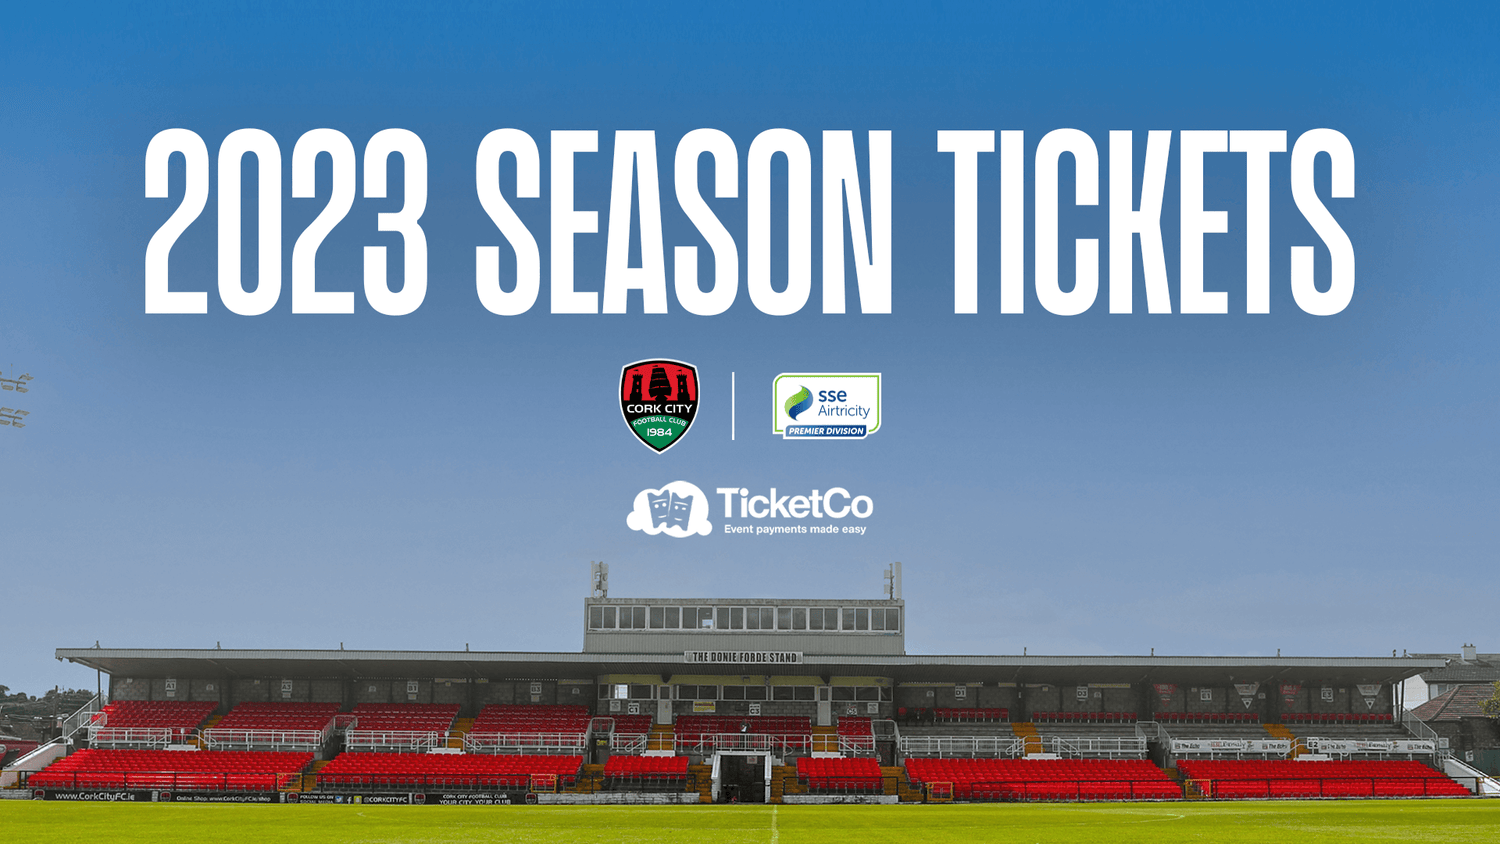 2023 Season Tickets Available Now!